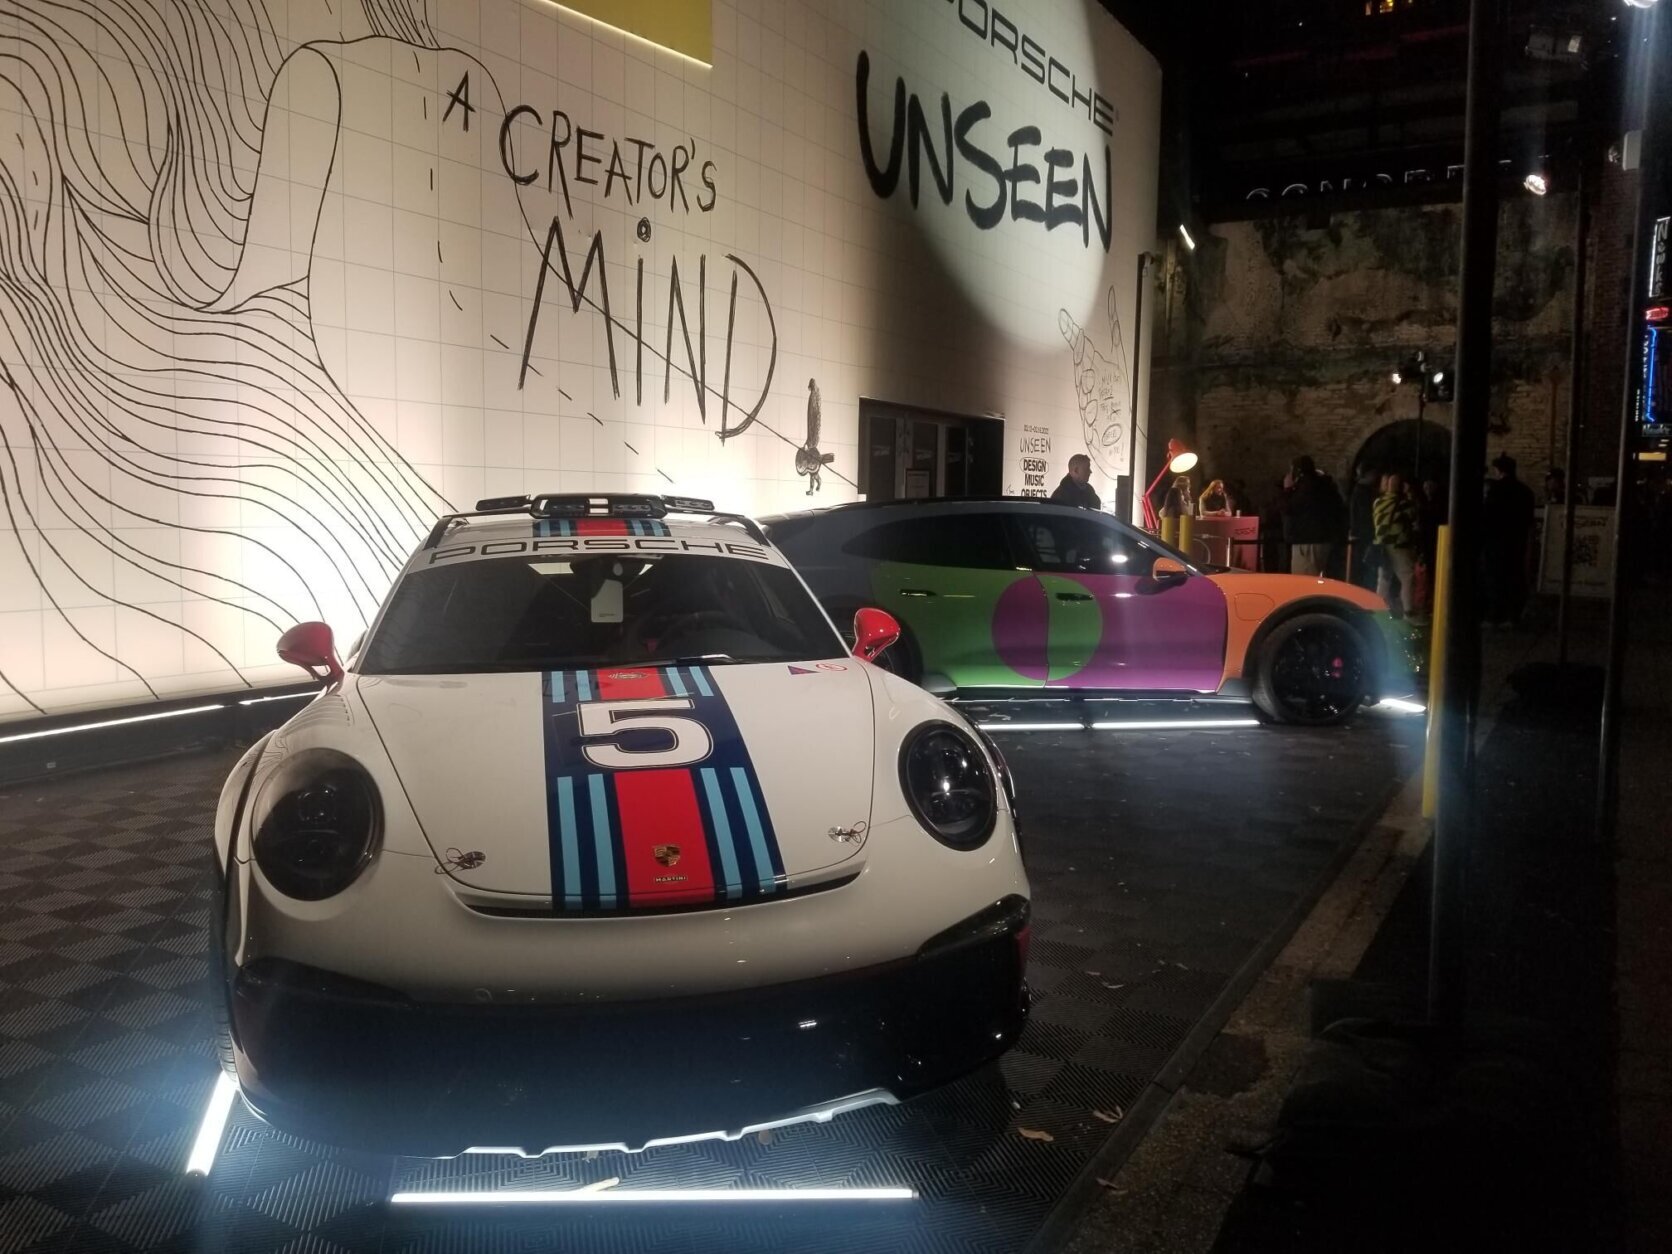 Rounding out the SXSW automotive lineup is Porsche, also making its SXSW debut under the terms of a three-year cooperative agreement.